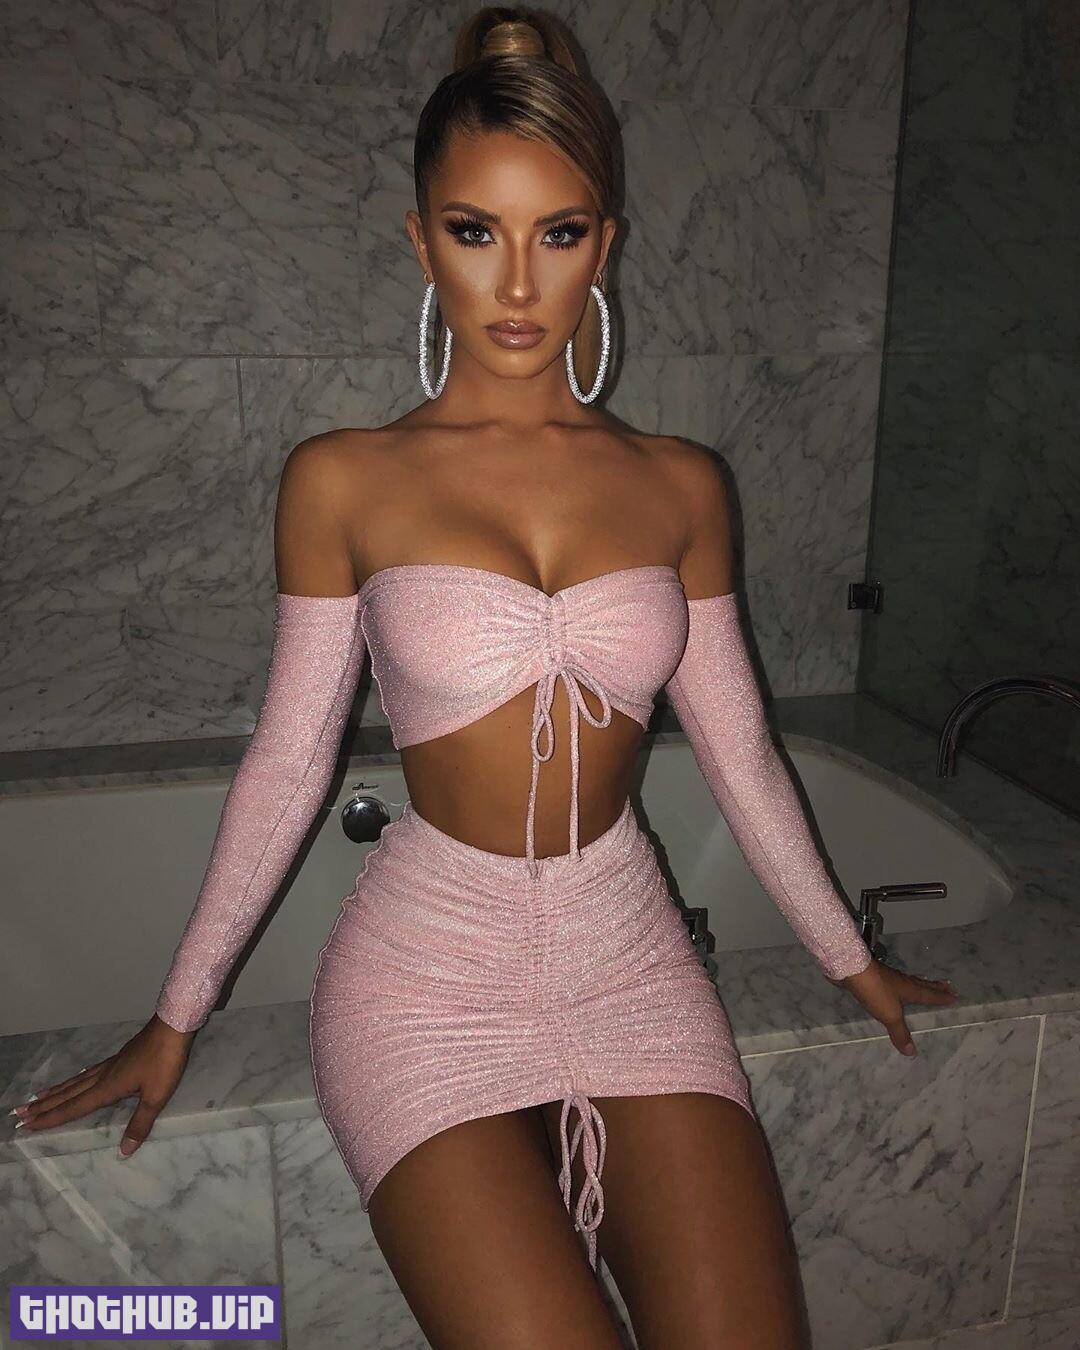 1680425592 63 Sierra Skye TheFappening Sexy 95 Photos and Videos